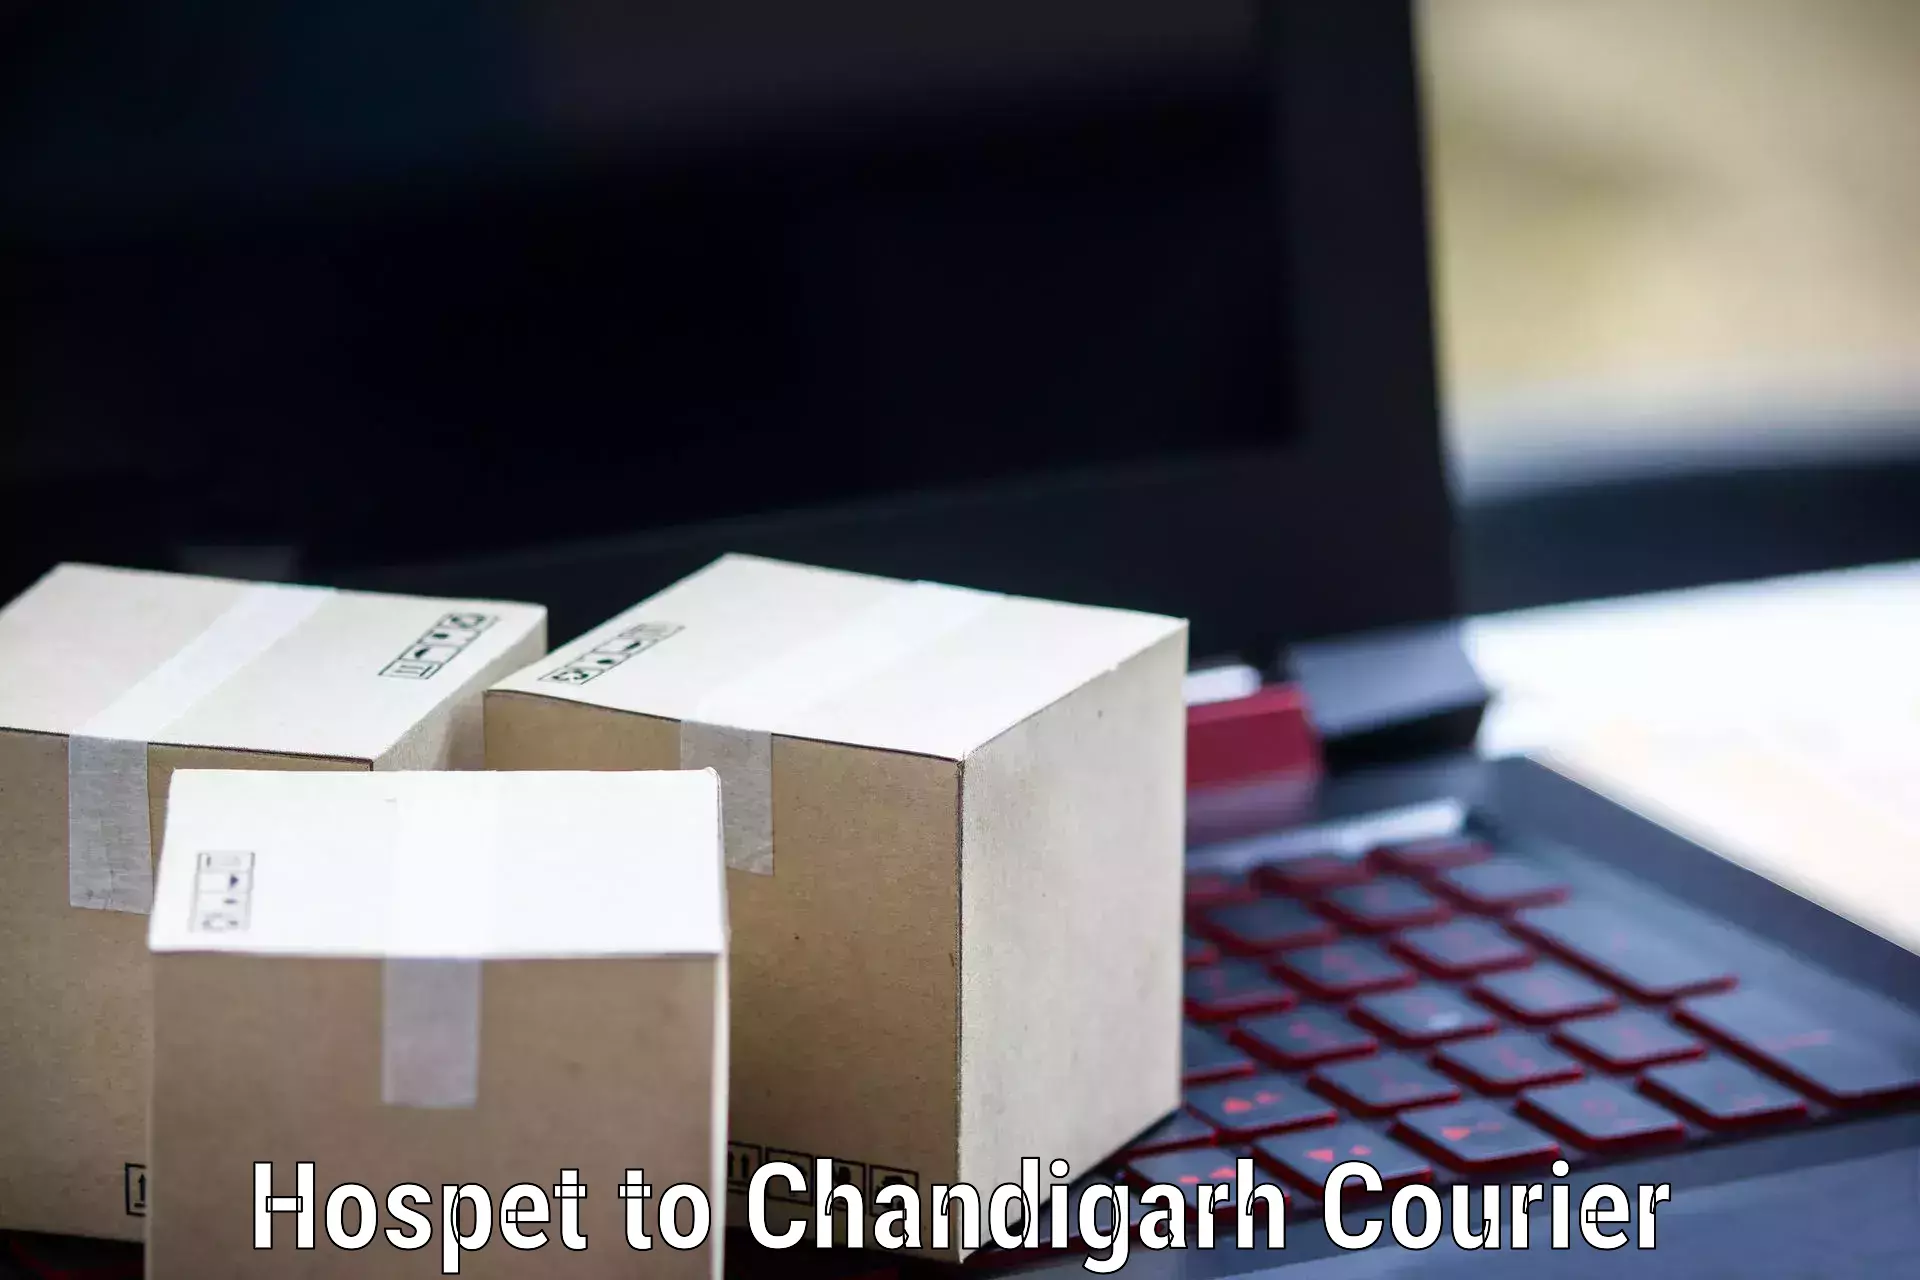 Express courier facilities Hospet to Chandigarh